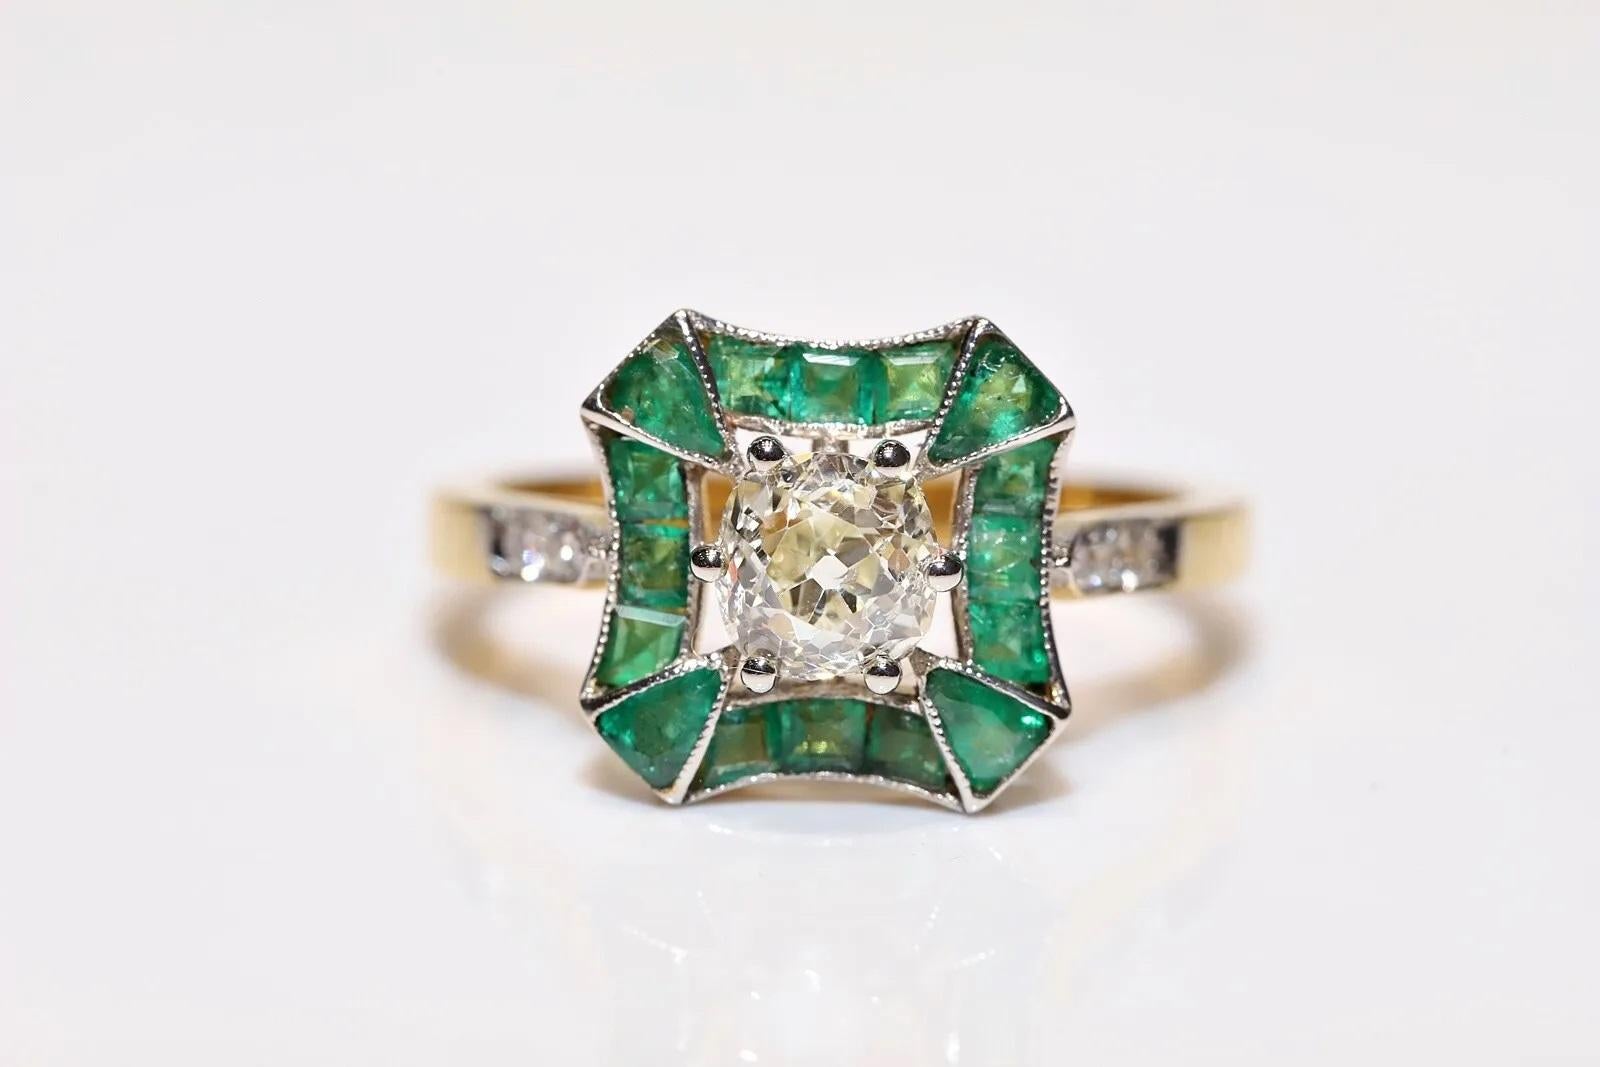 New Made 14k Gold Natural Old Cut Diamond And Caliber Emerald Solitaire Ring For Sale 6